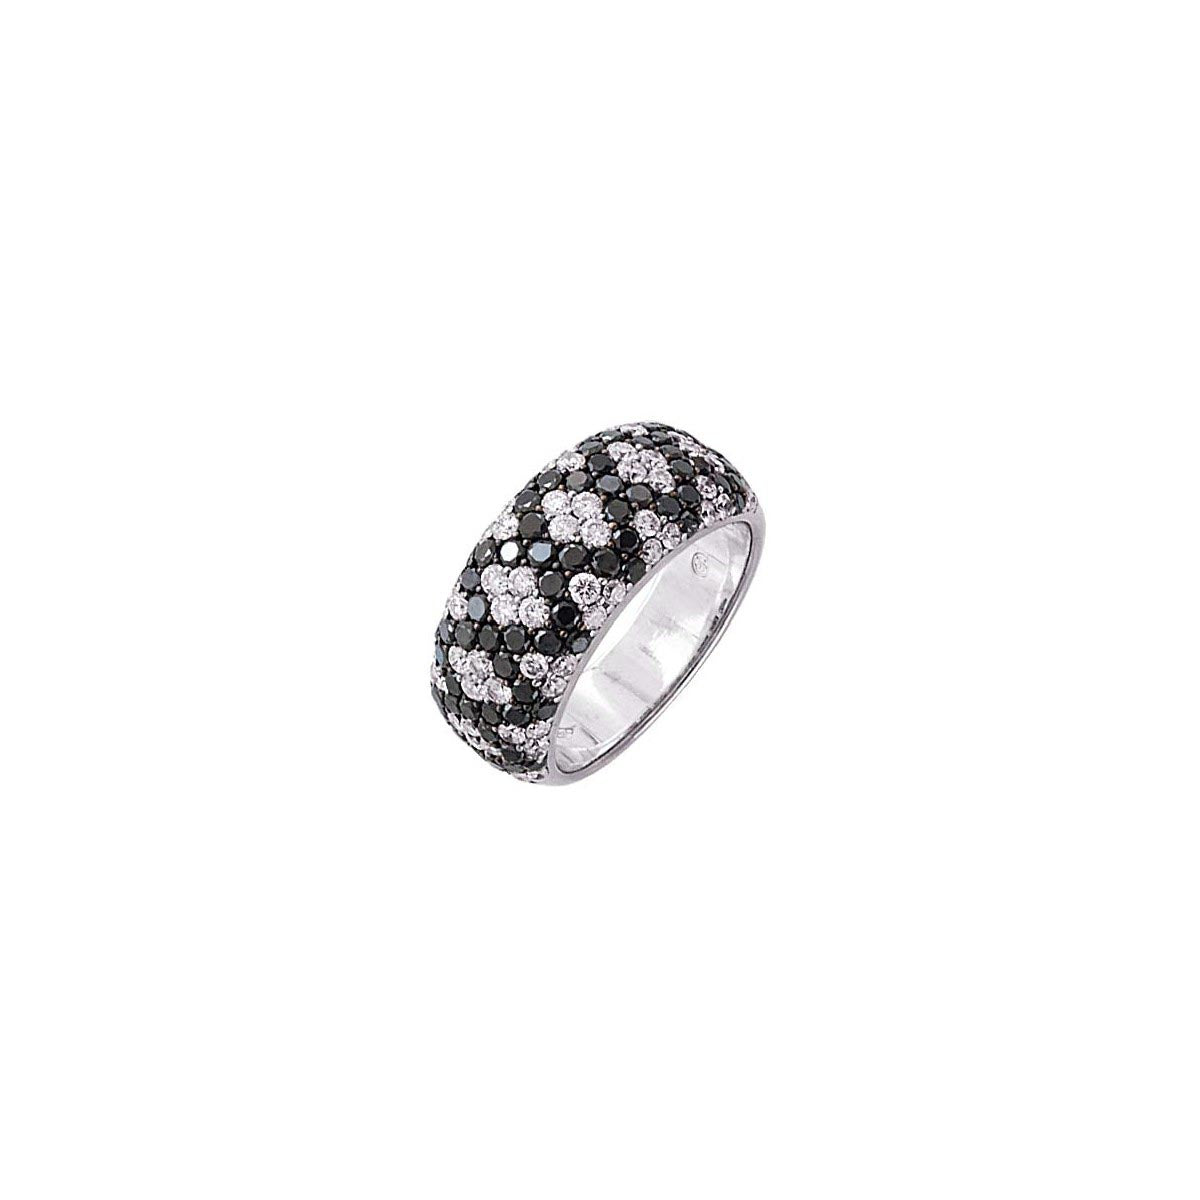 A ring with a black and white diamond mosaic design by Dilamani